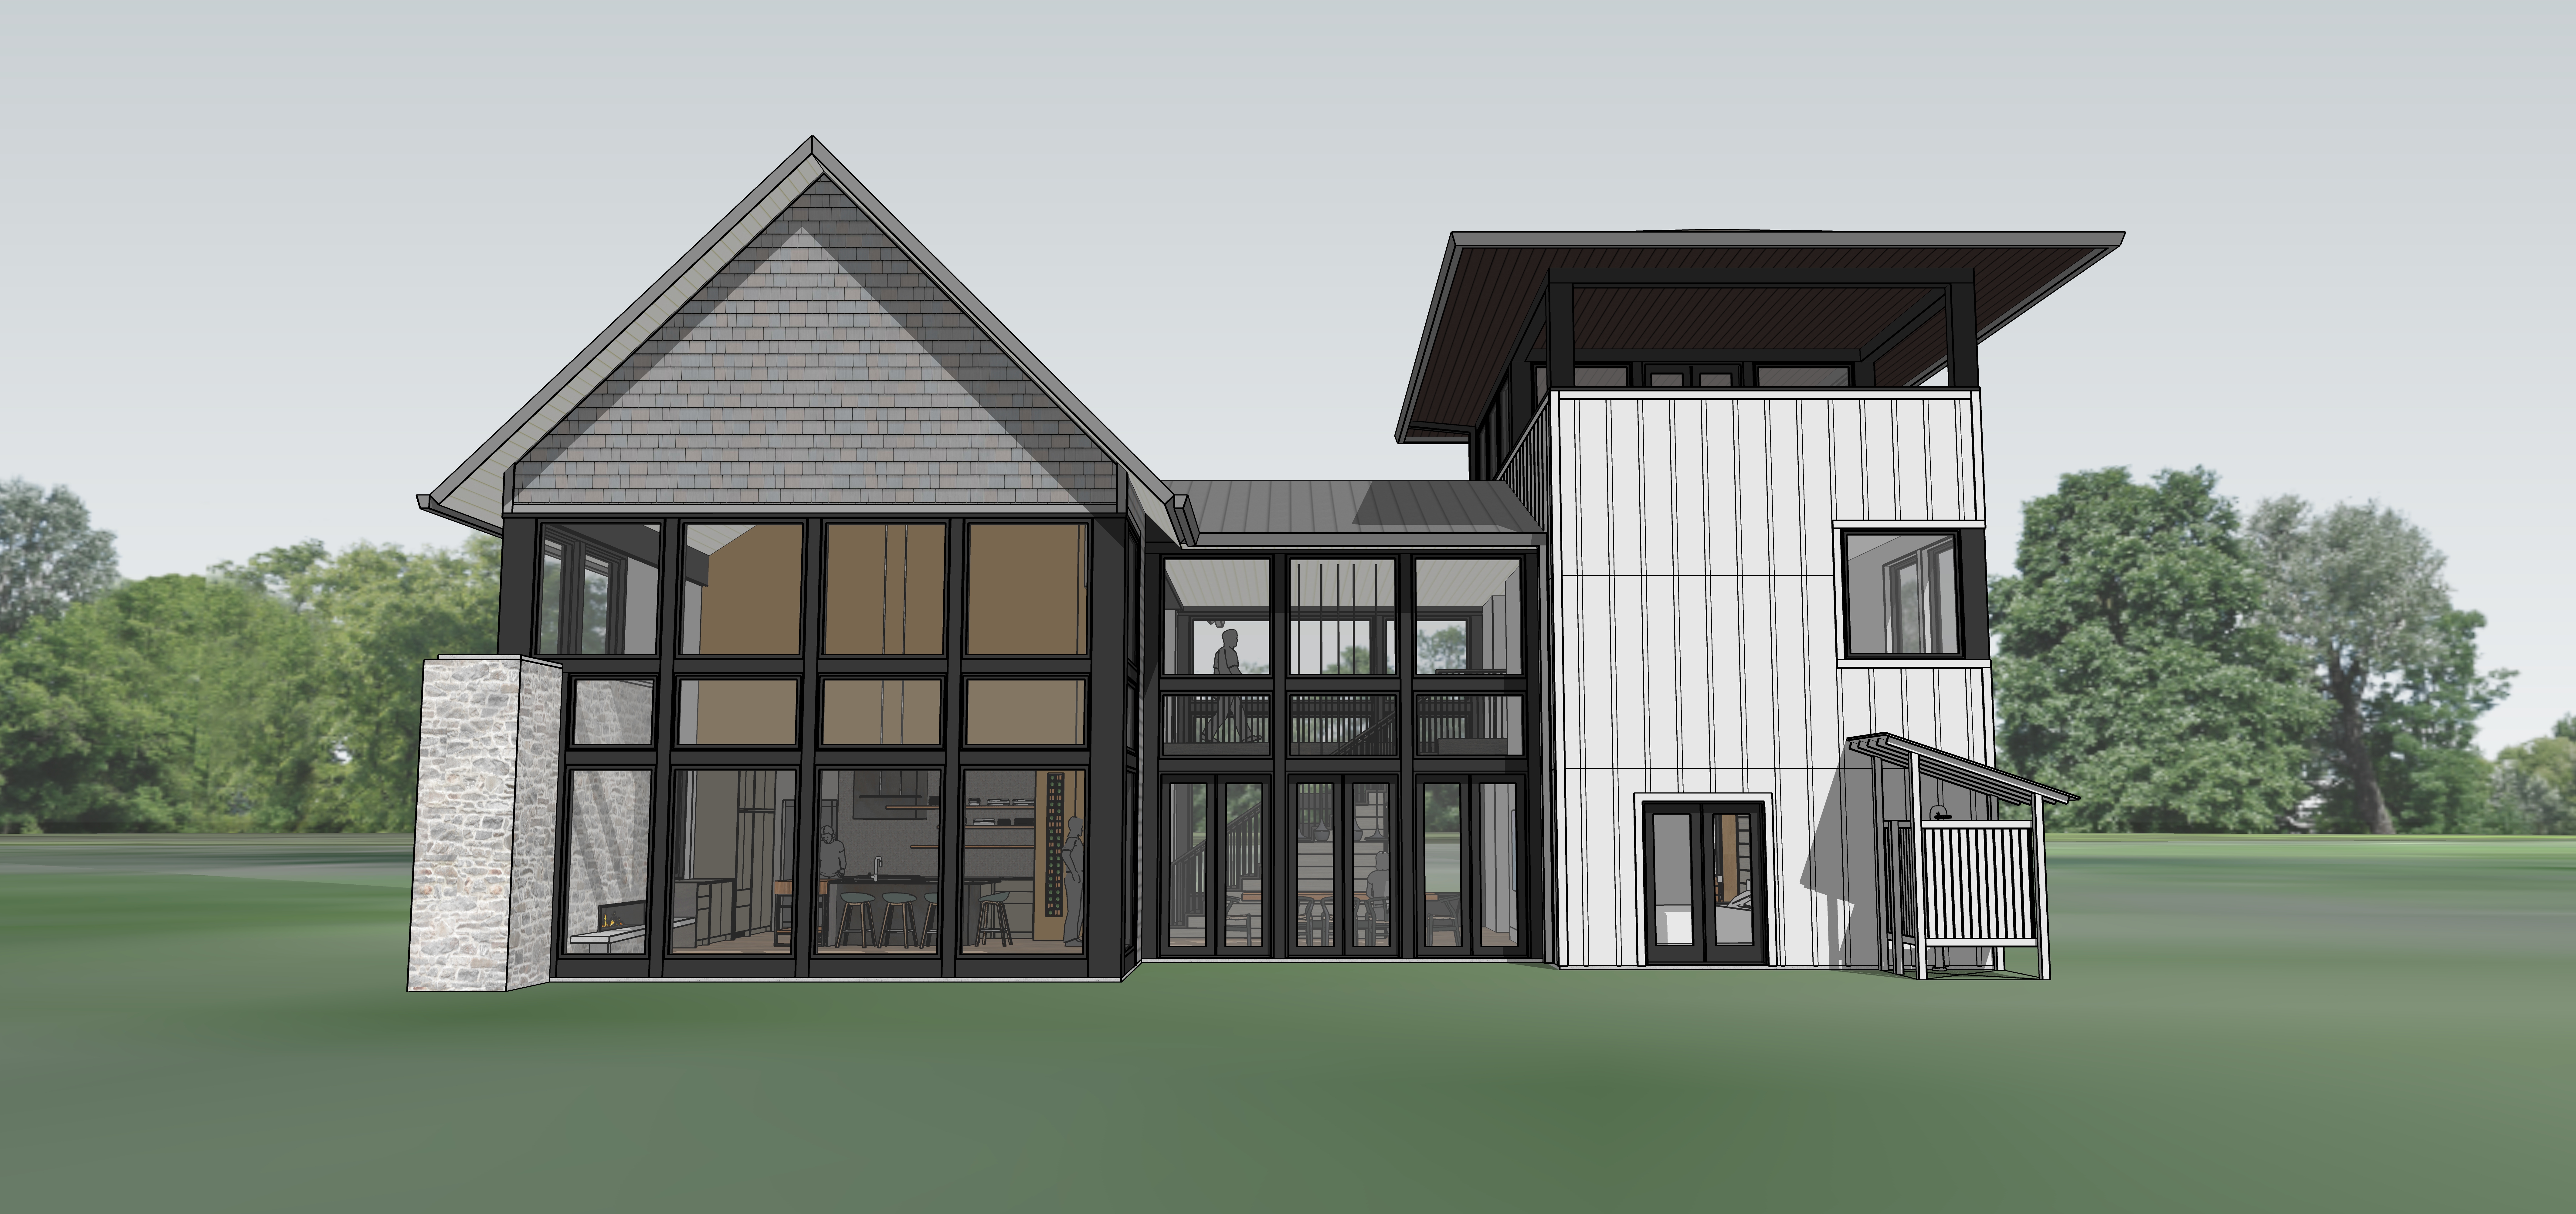 rendering of house exterior